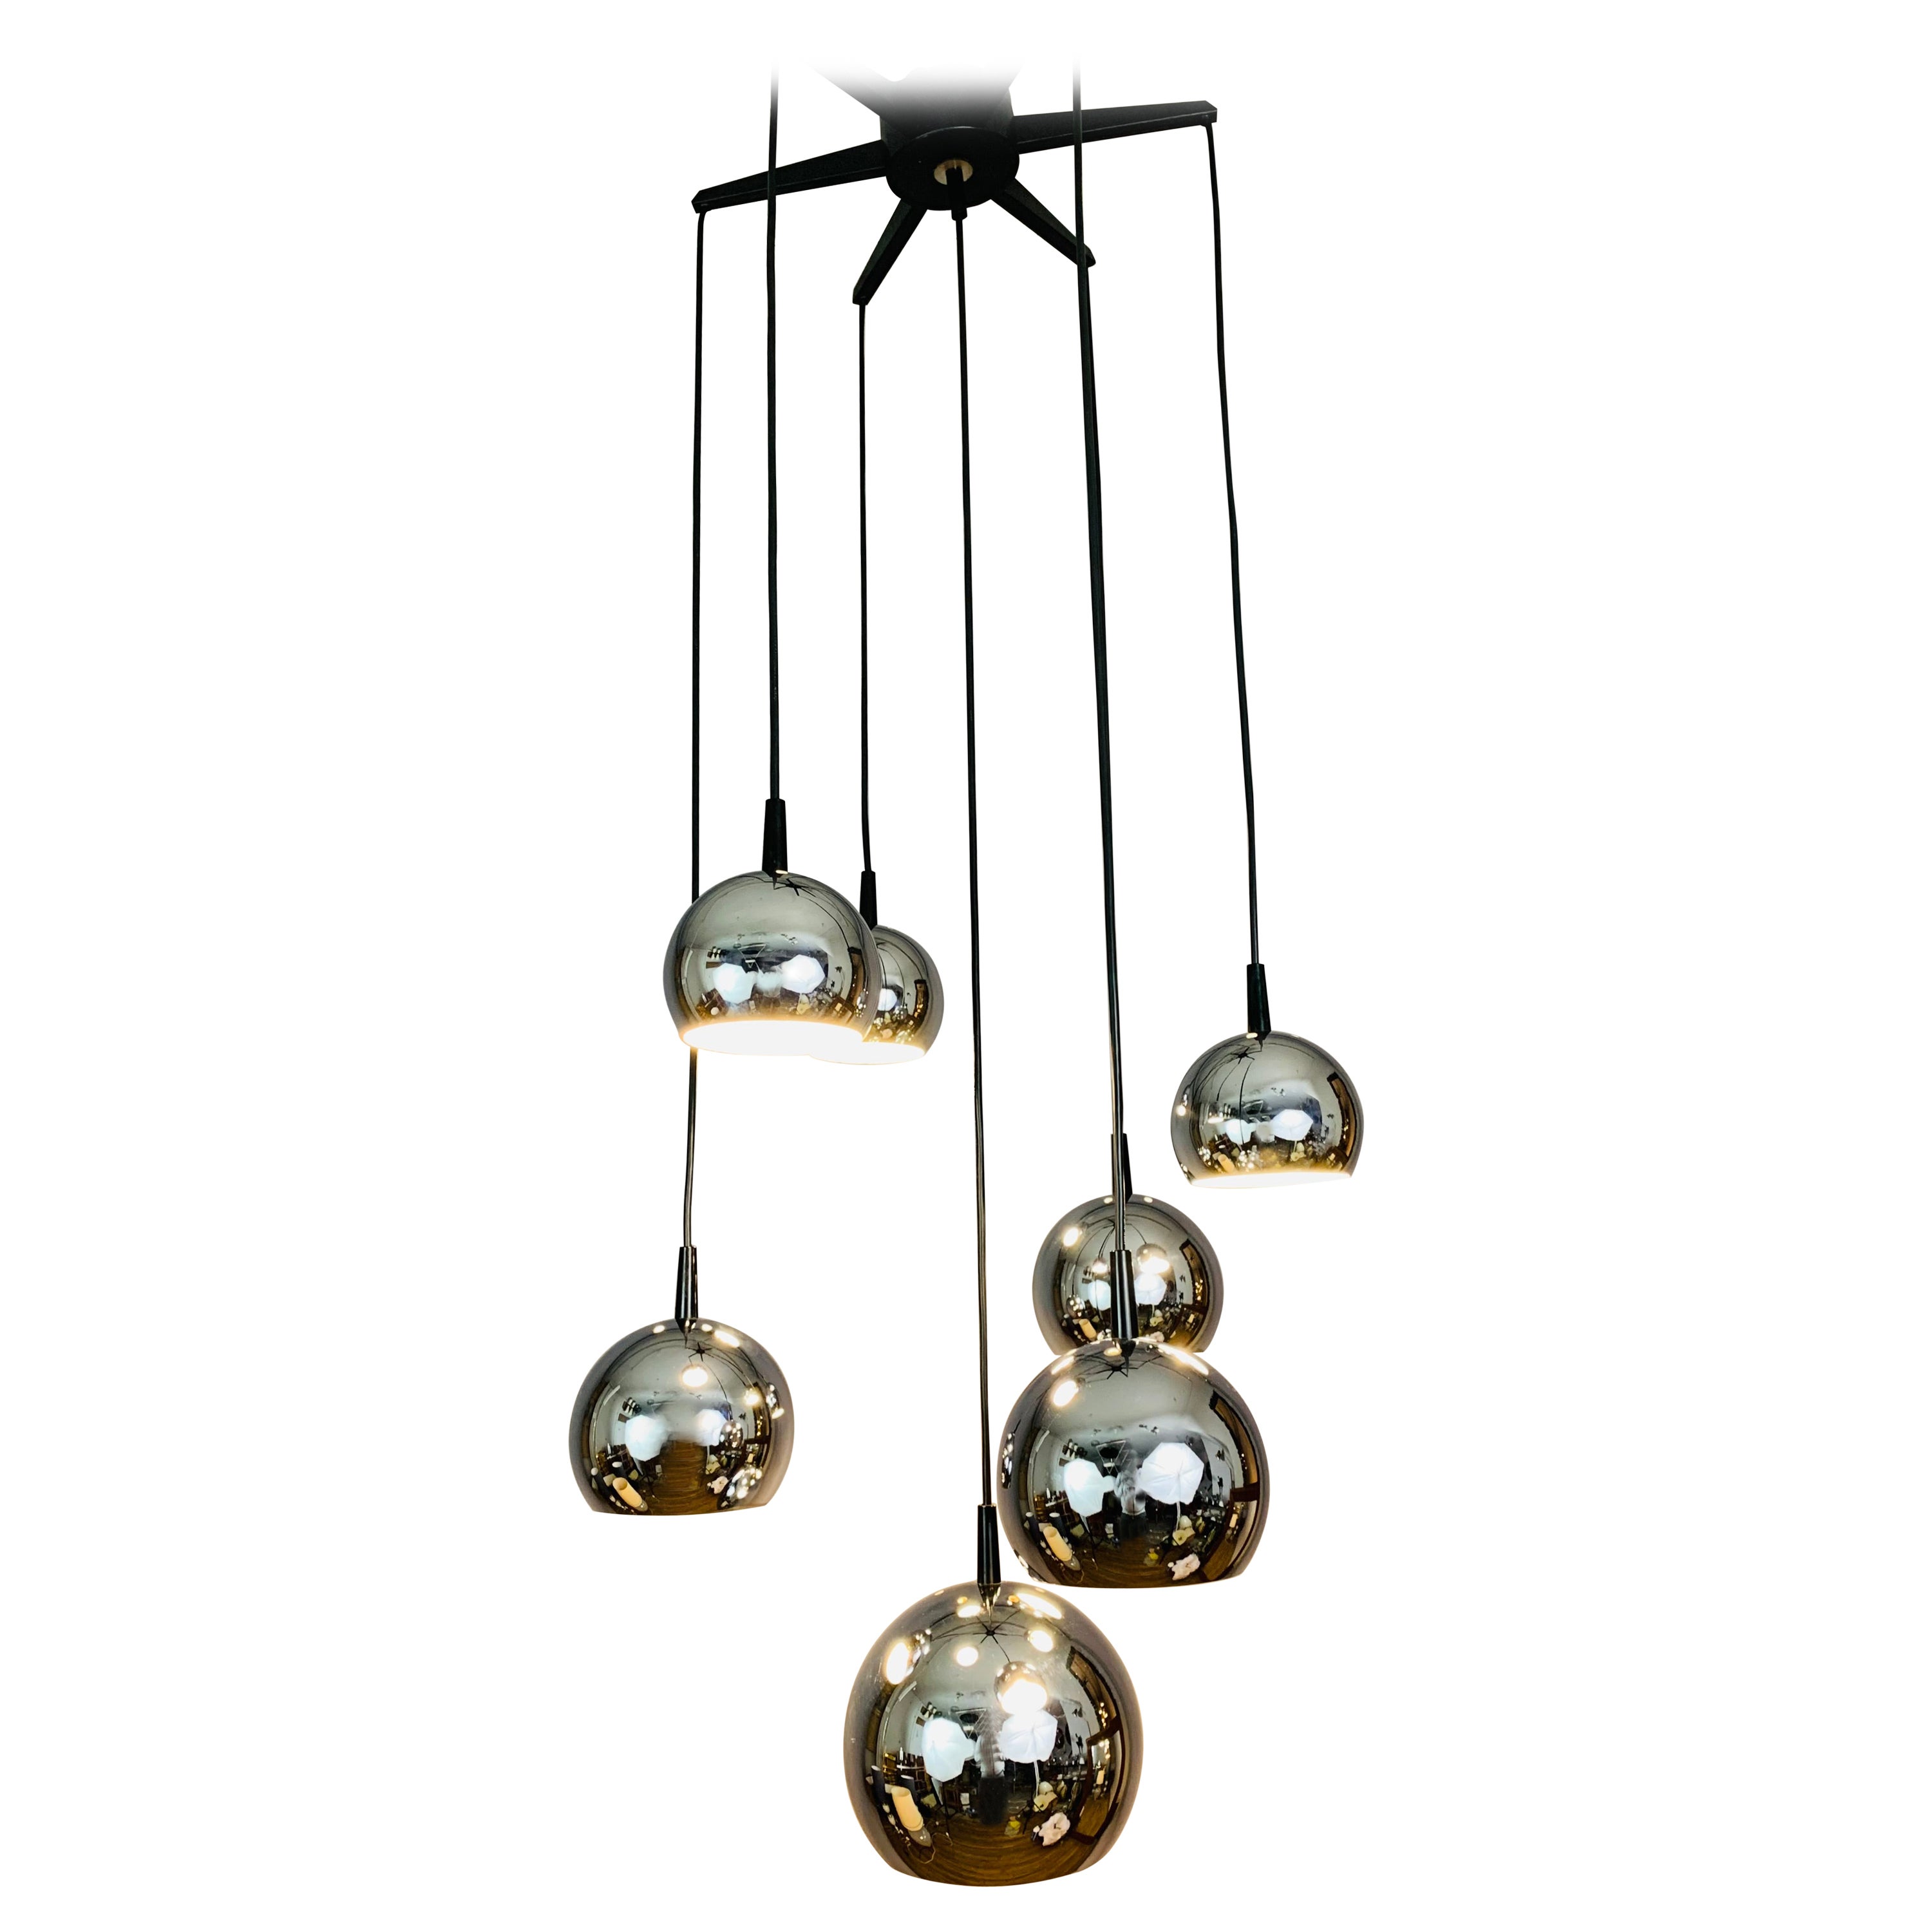 1970s Mid Century Space Age 7 Chrome Ball Cascading Globe Hanging Ceiling Light